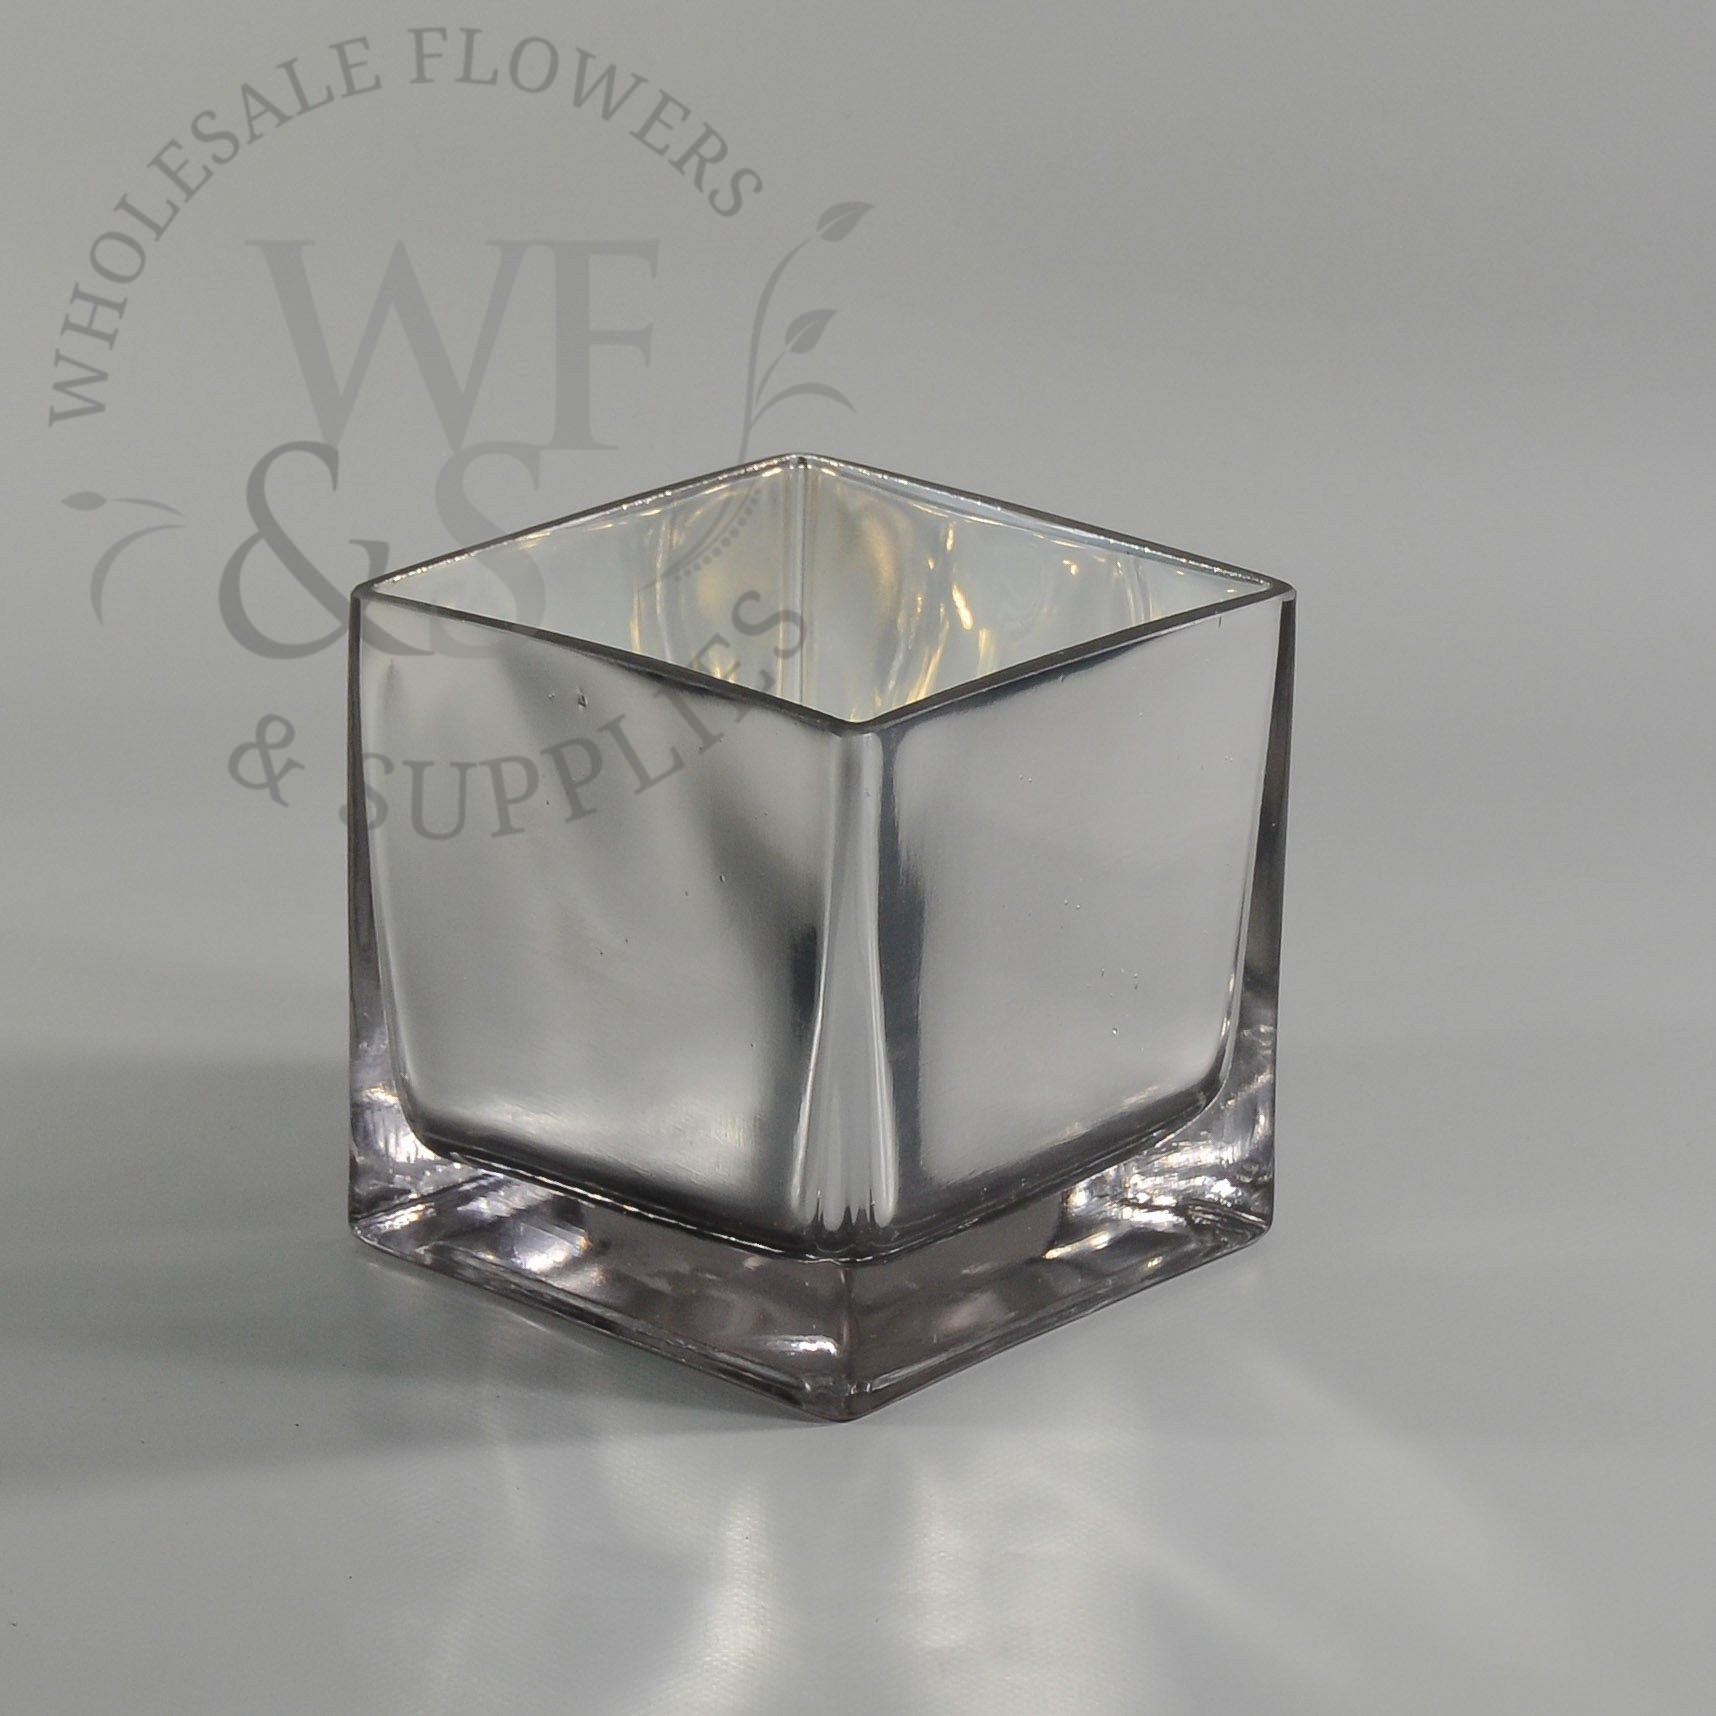 19 Fantastic Small Crystal Vase 2023 free download small crystal vase of 13 fresh silver mirror vase bogekompresorturkiye com for crystal mirror inspirational mirror vase 8 1h vases mirrored square cube riser inch squarei 0d uk